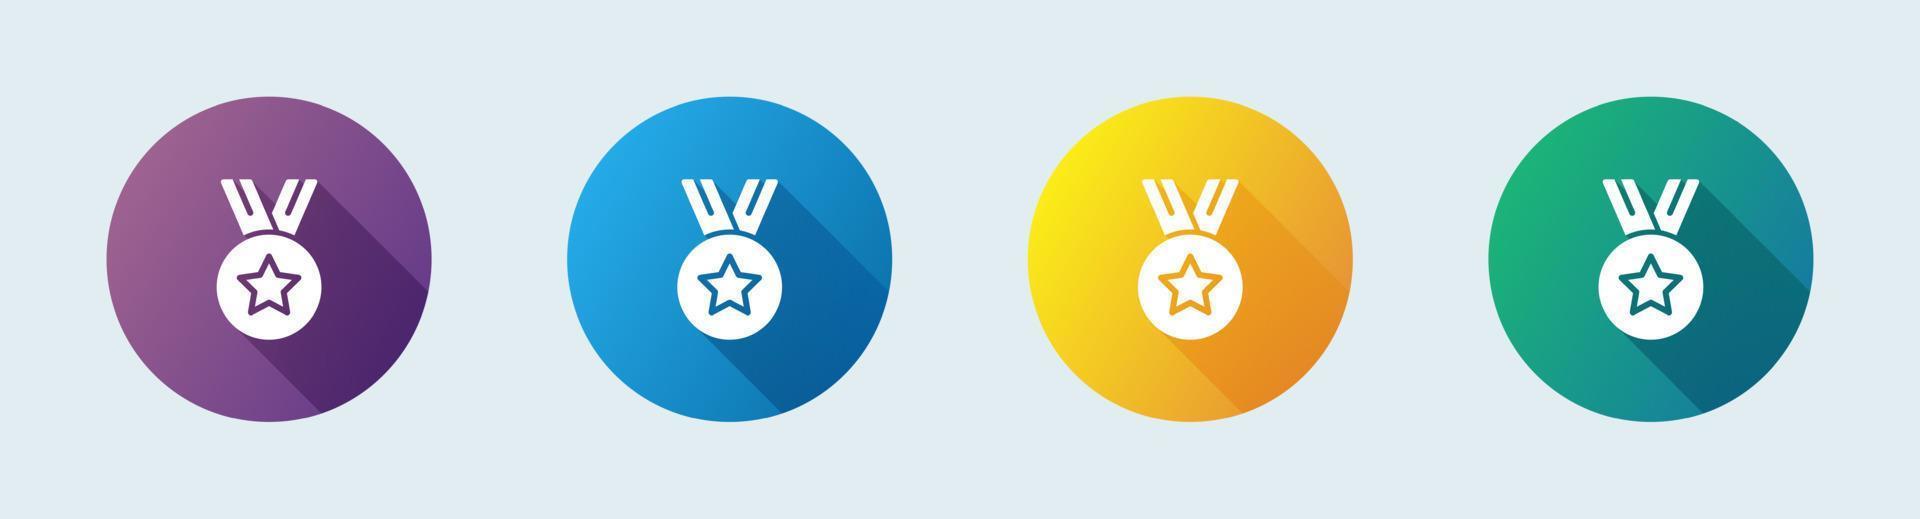 Medal solid icon in flat design style. Award signs vector illustration.